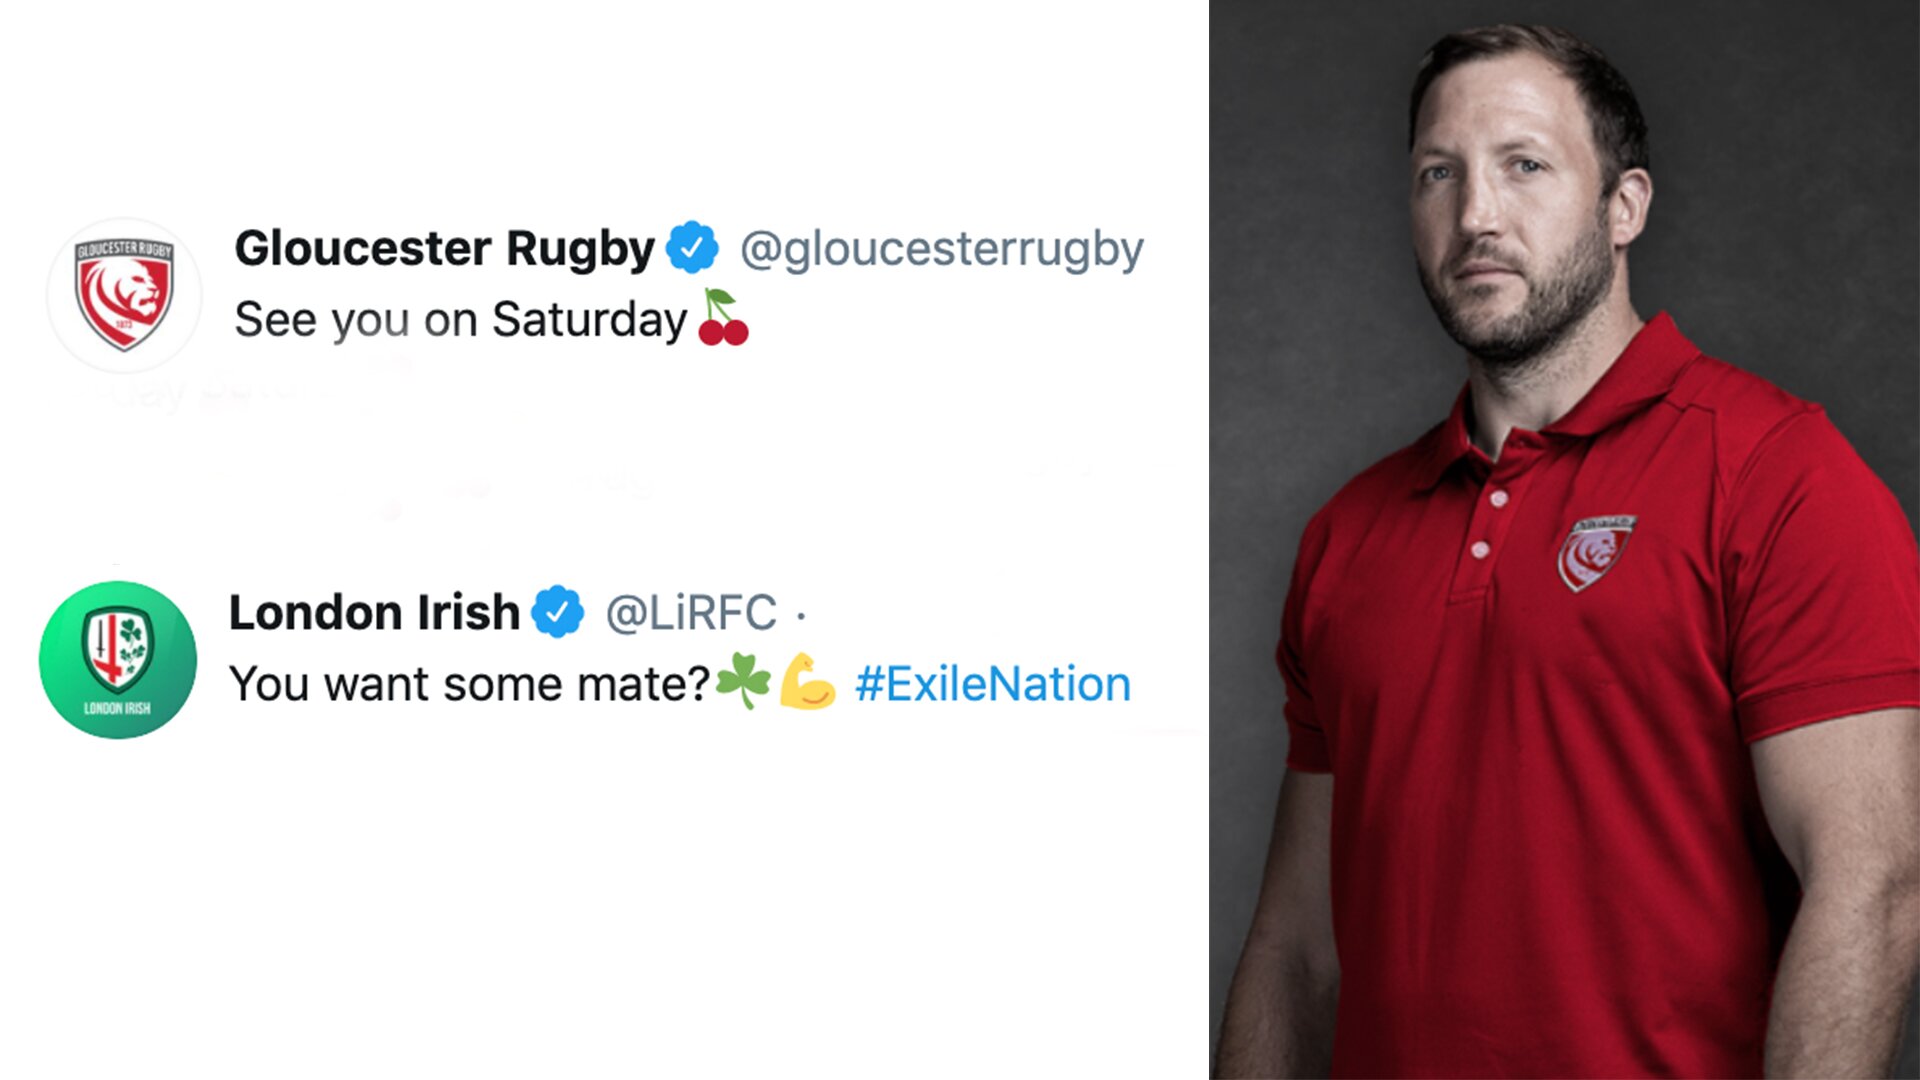 Gloucester and London Irish are going at it online in fiery social media spat